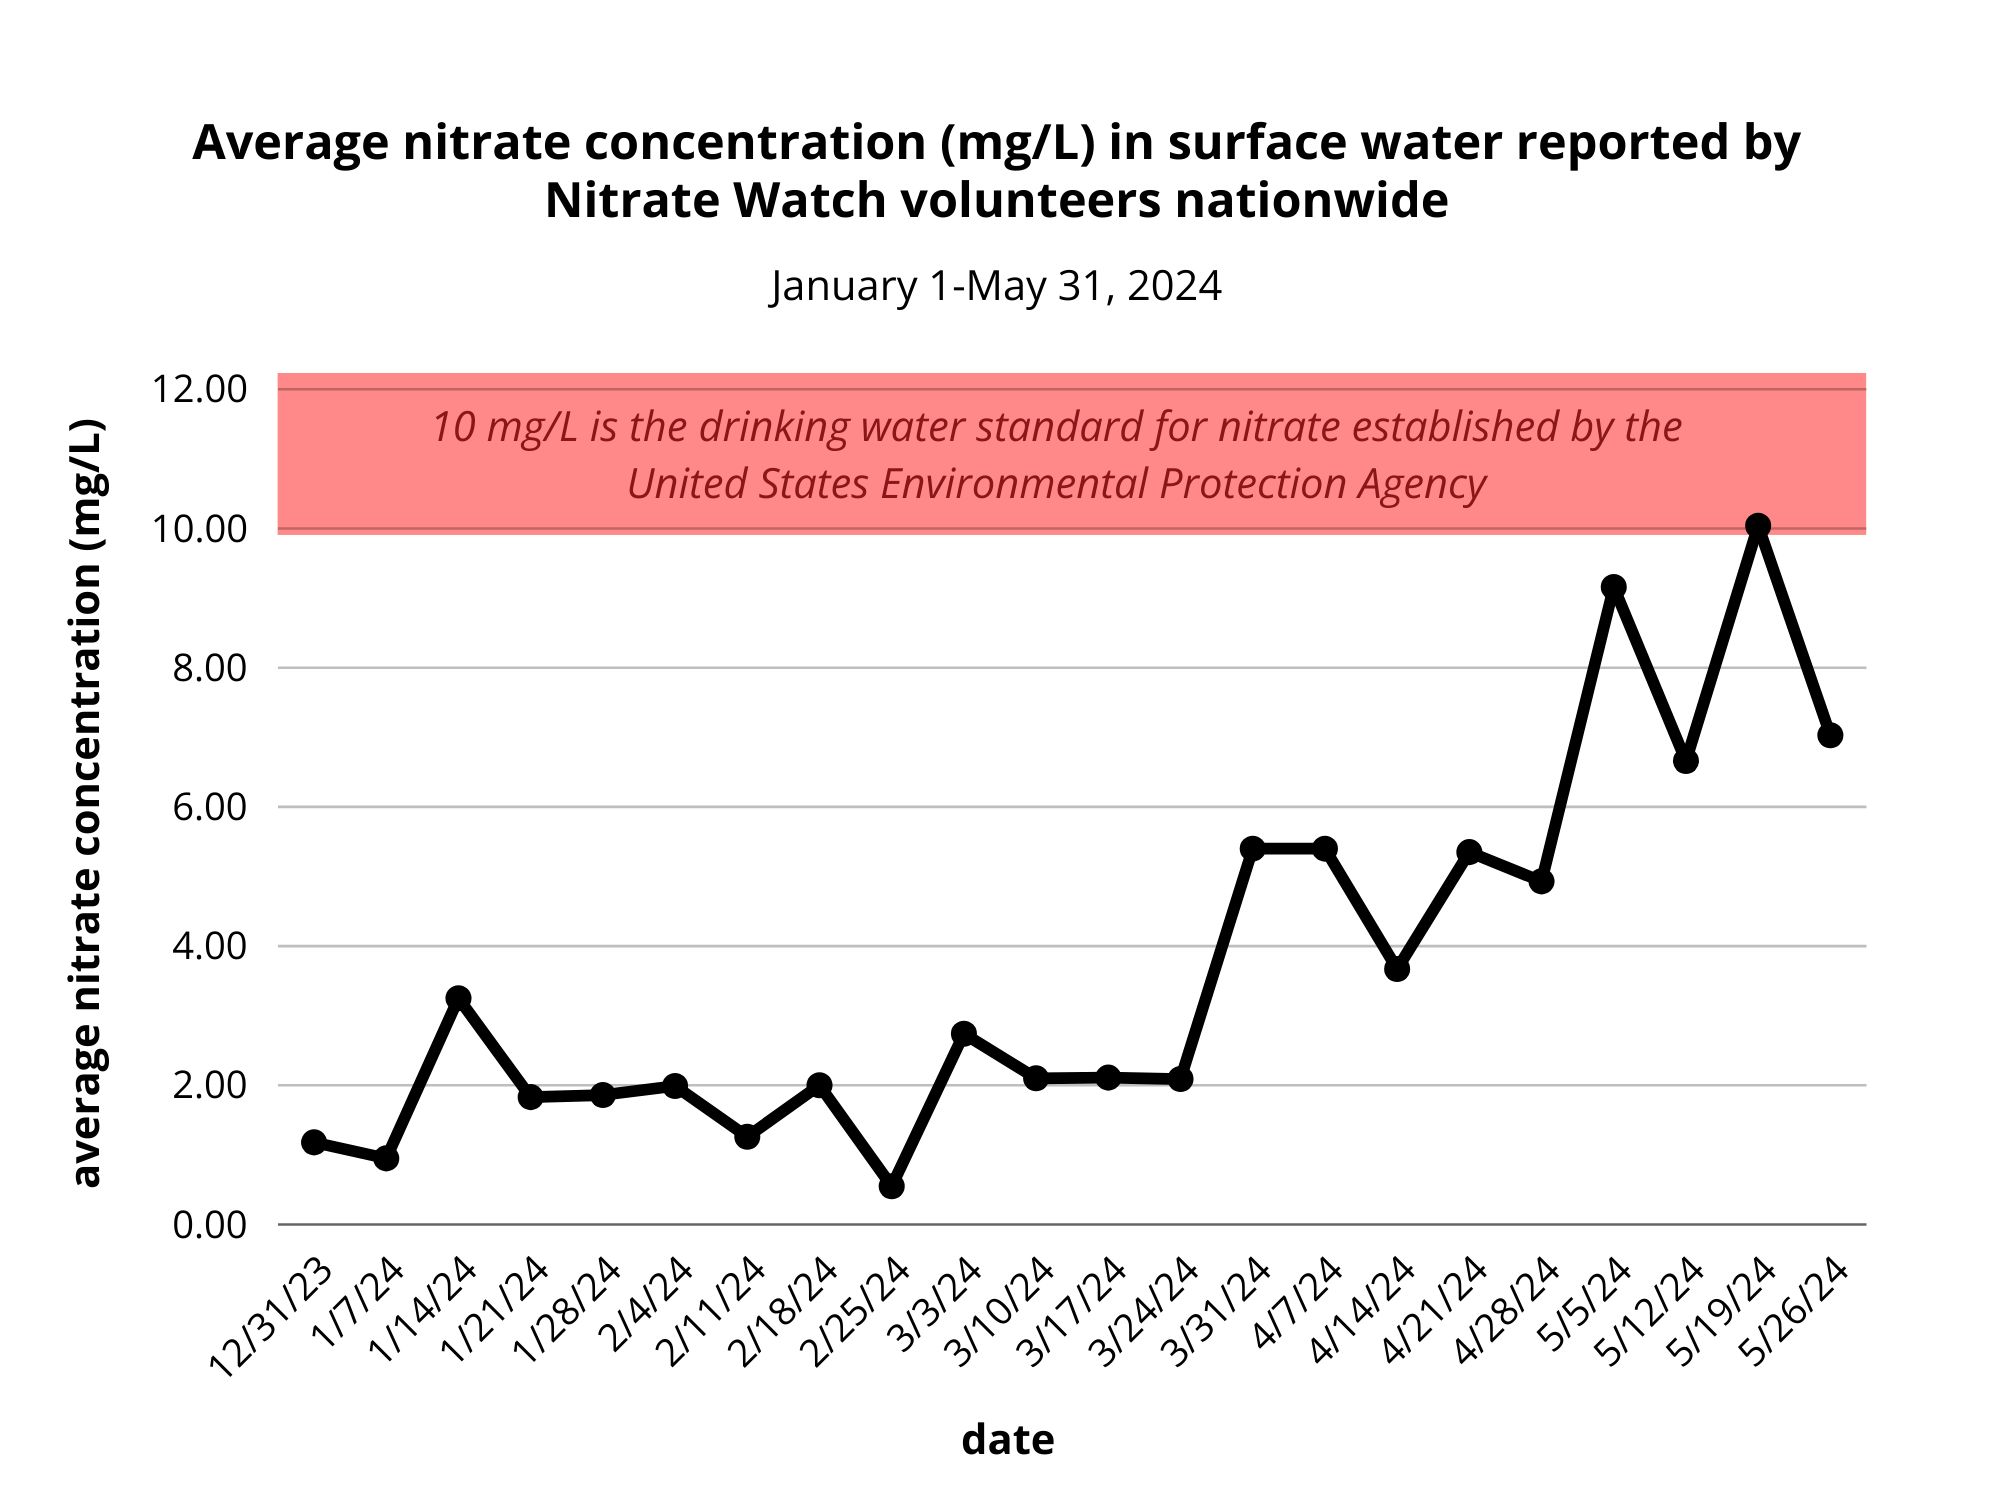 Nitrate Watch national averages, January - May 2024